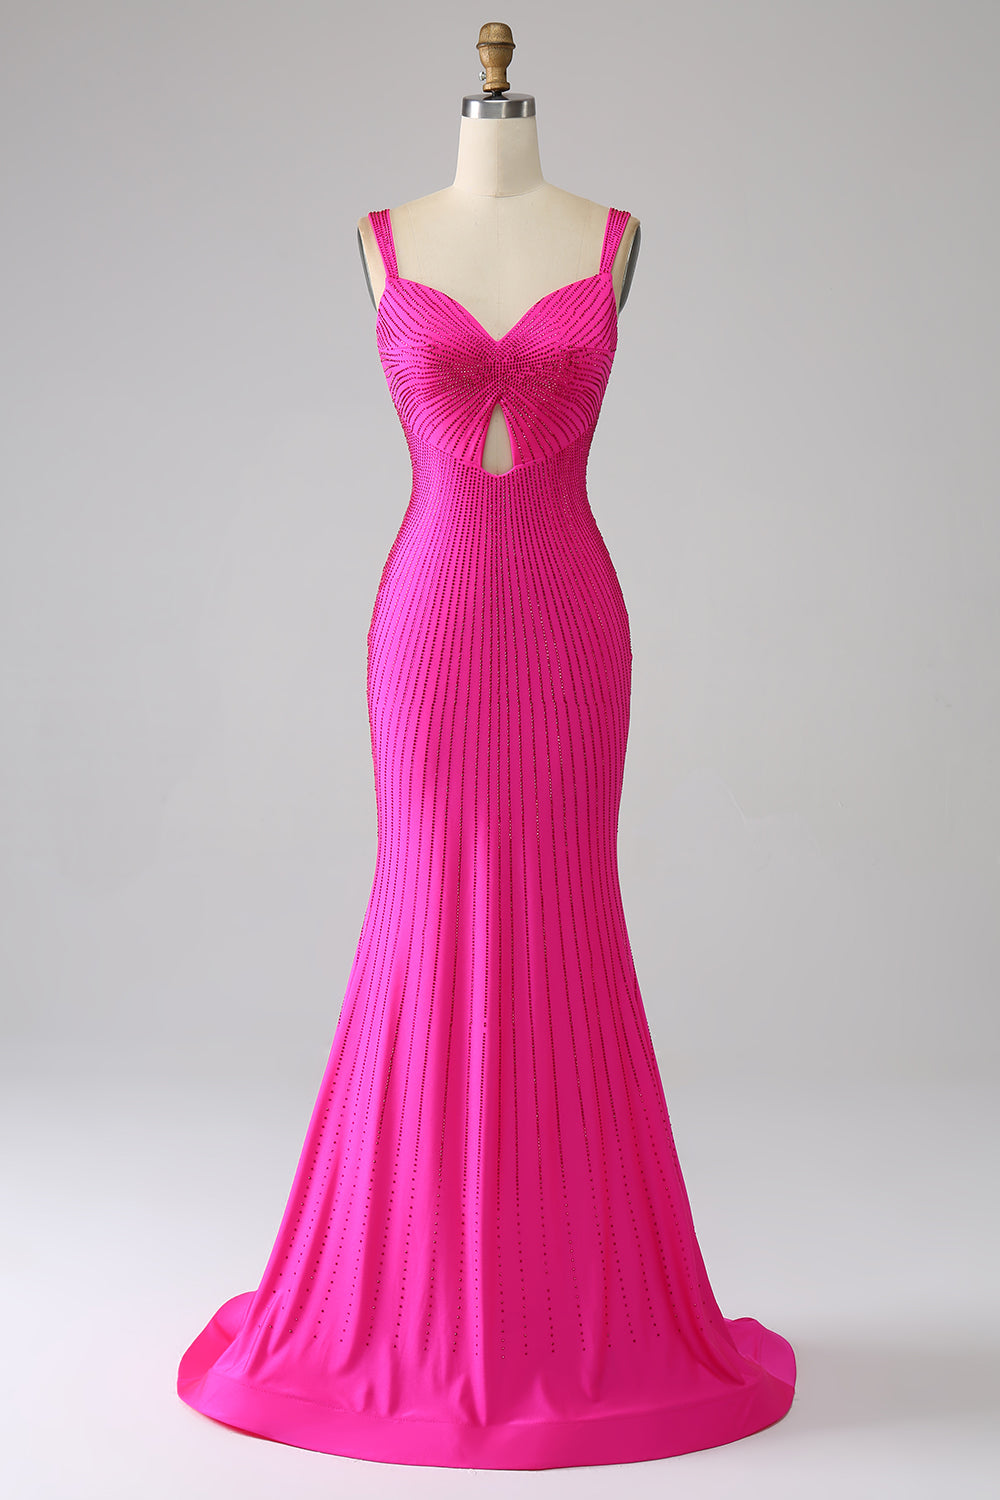 Sparkly Mermaid Hot Pink Prom Dress med Hollow-out